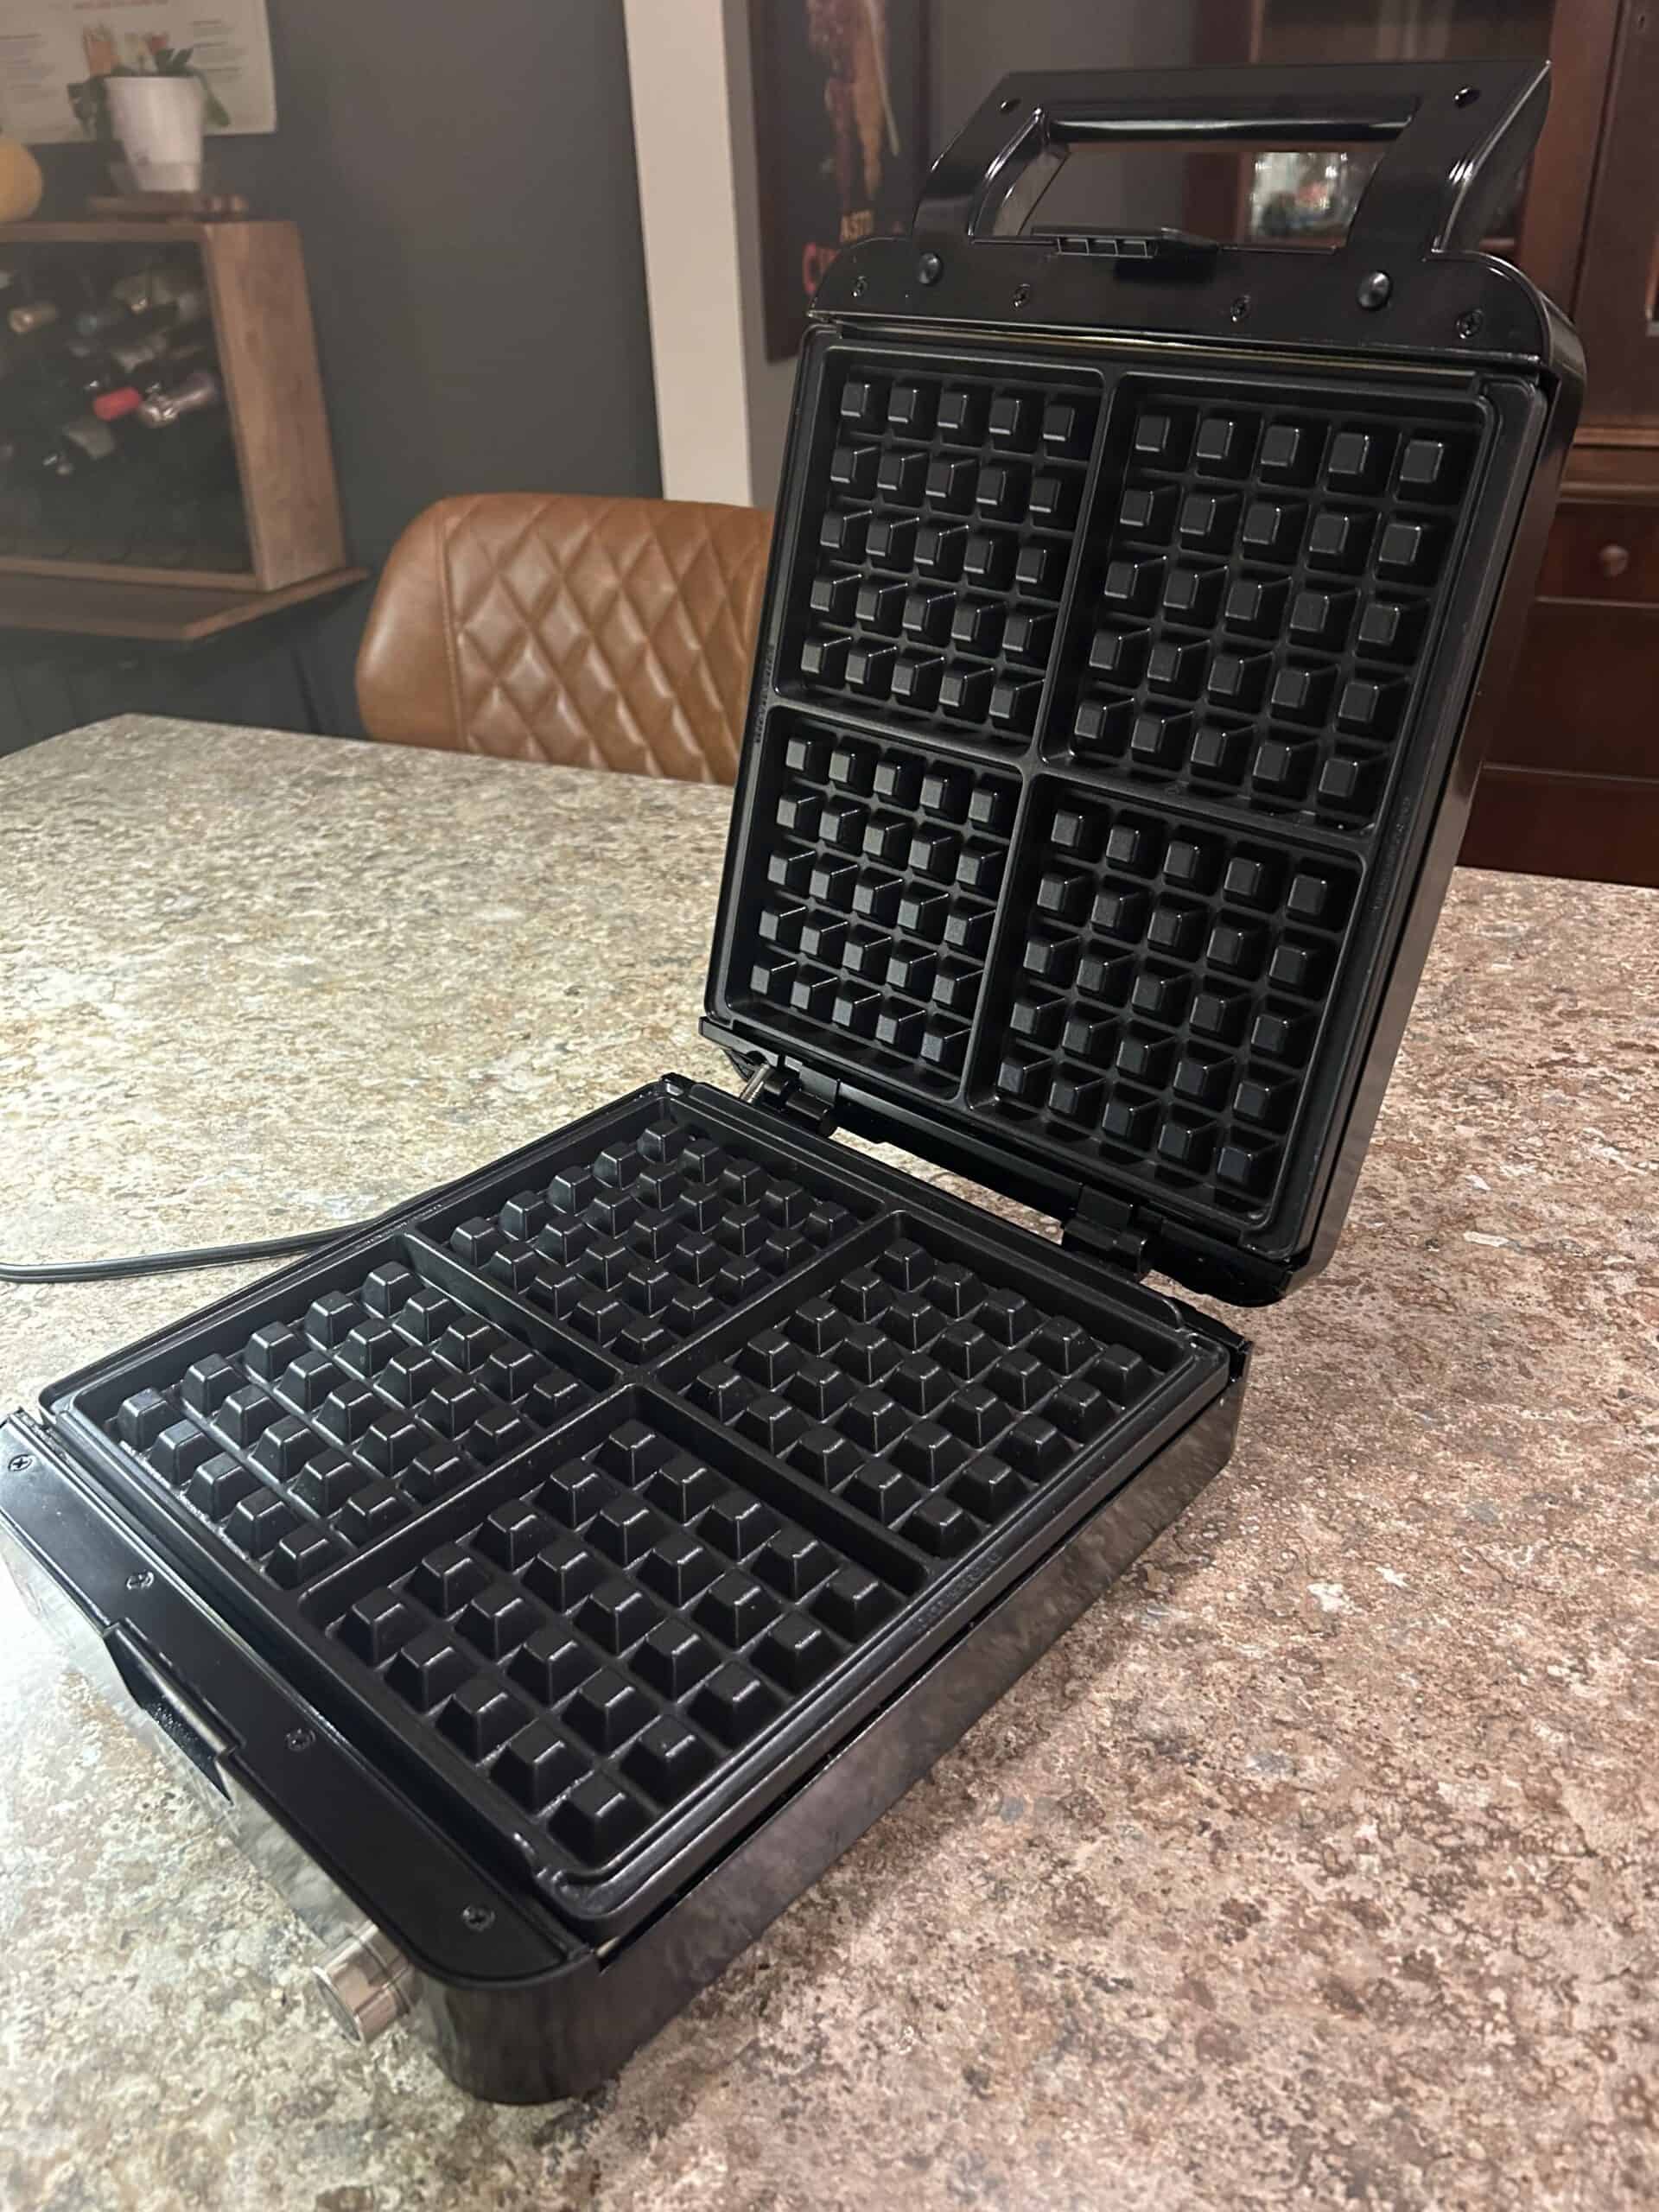 Krup Waffle Maker with Removable Plates, shown with the lid open